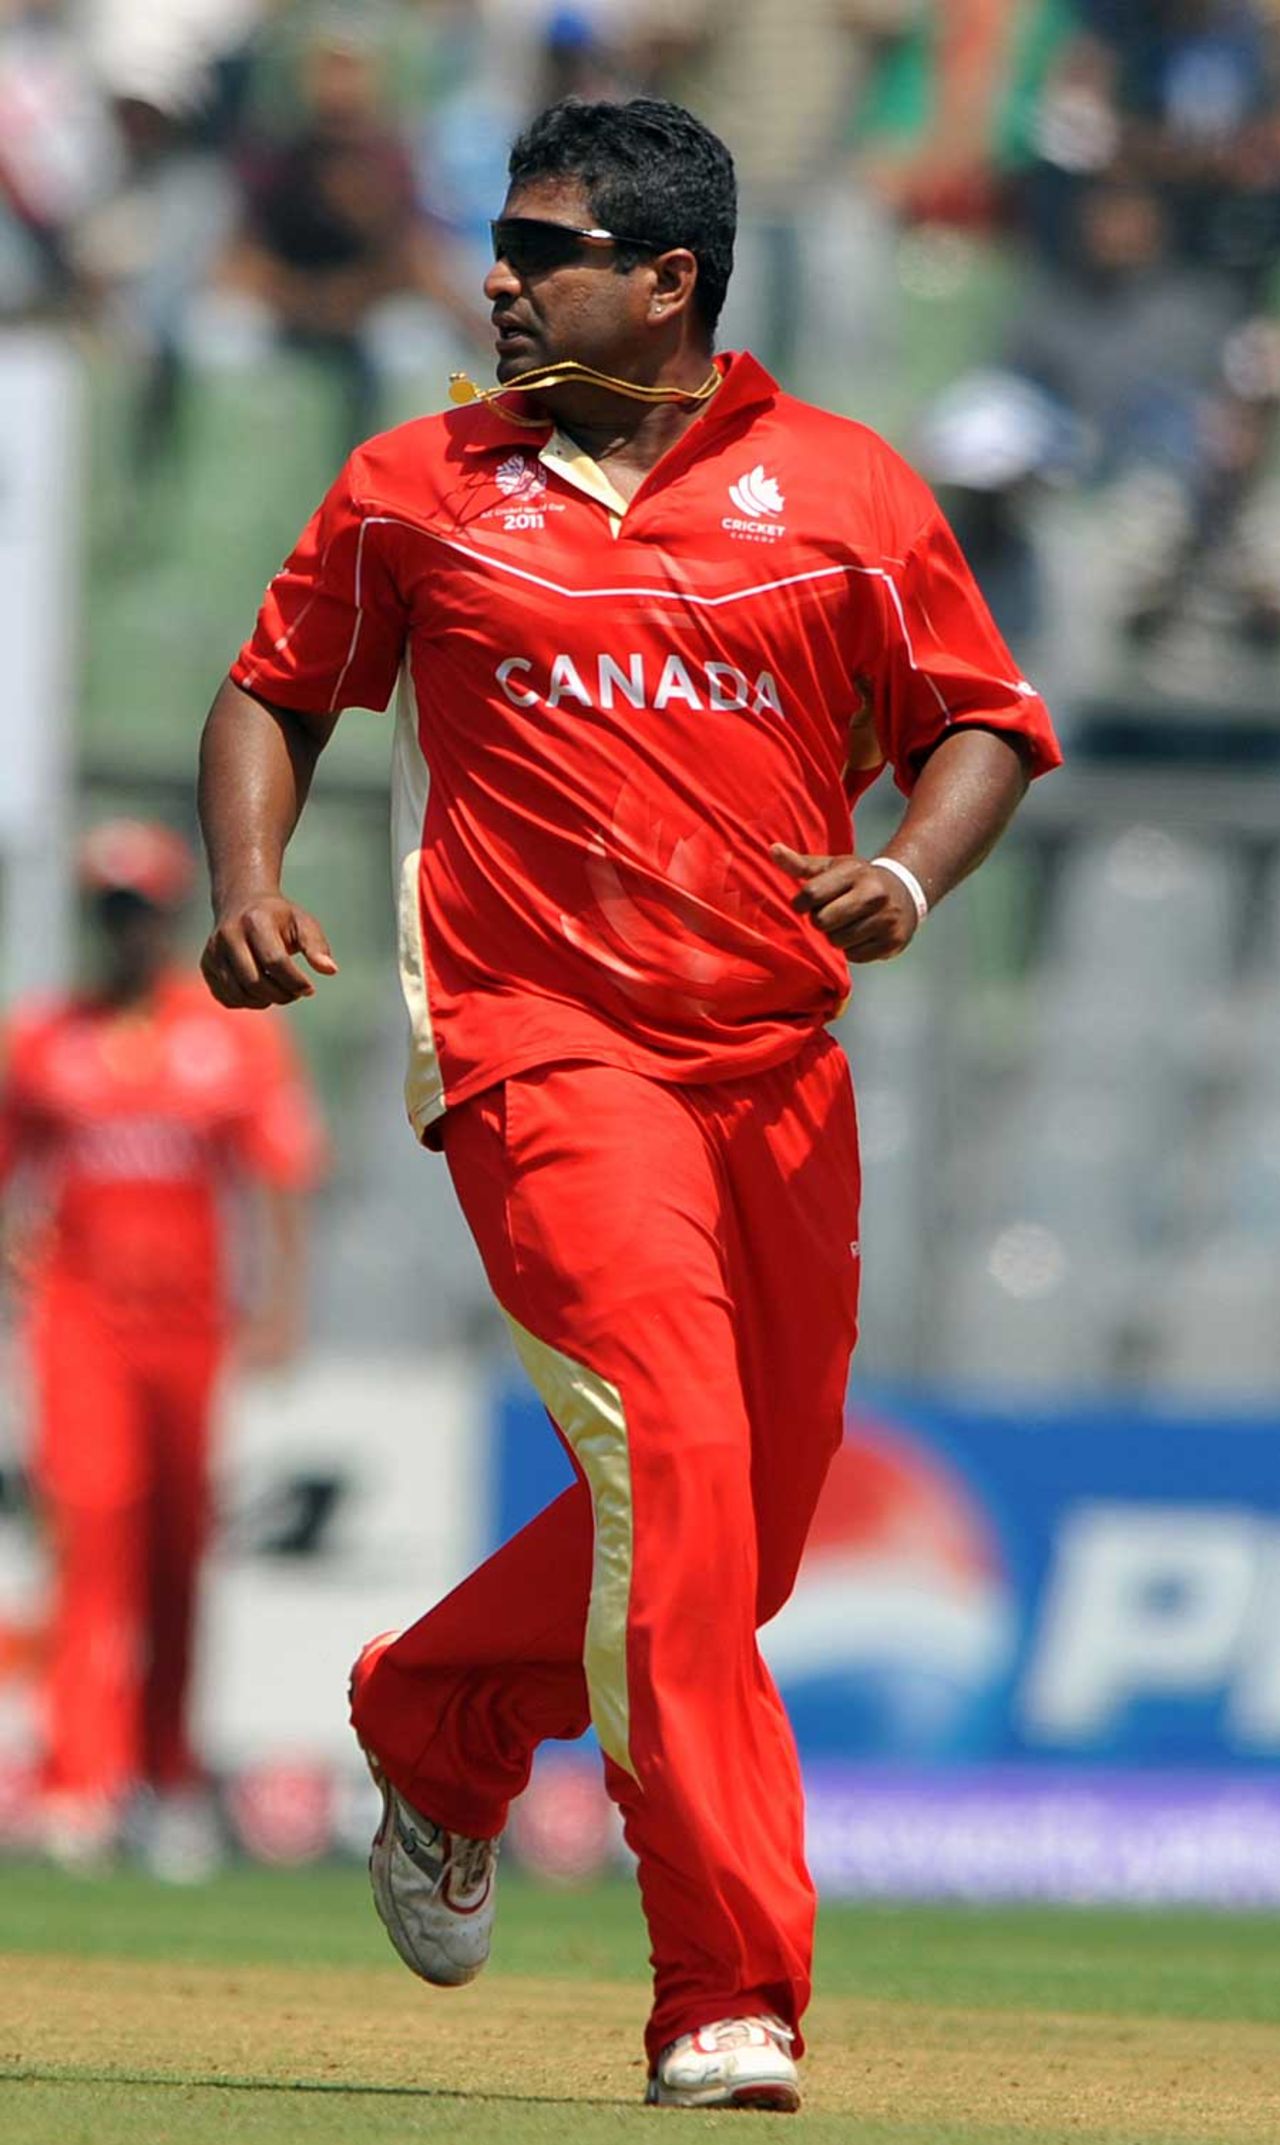 Balaji Rao picked up two wickets, Canada v New Zealand, World Cup 2011, Group A, Mumbai, March 13 2011